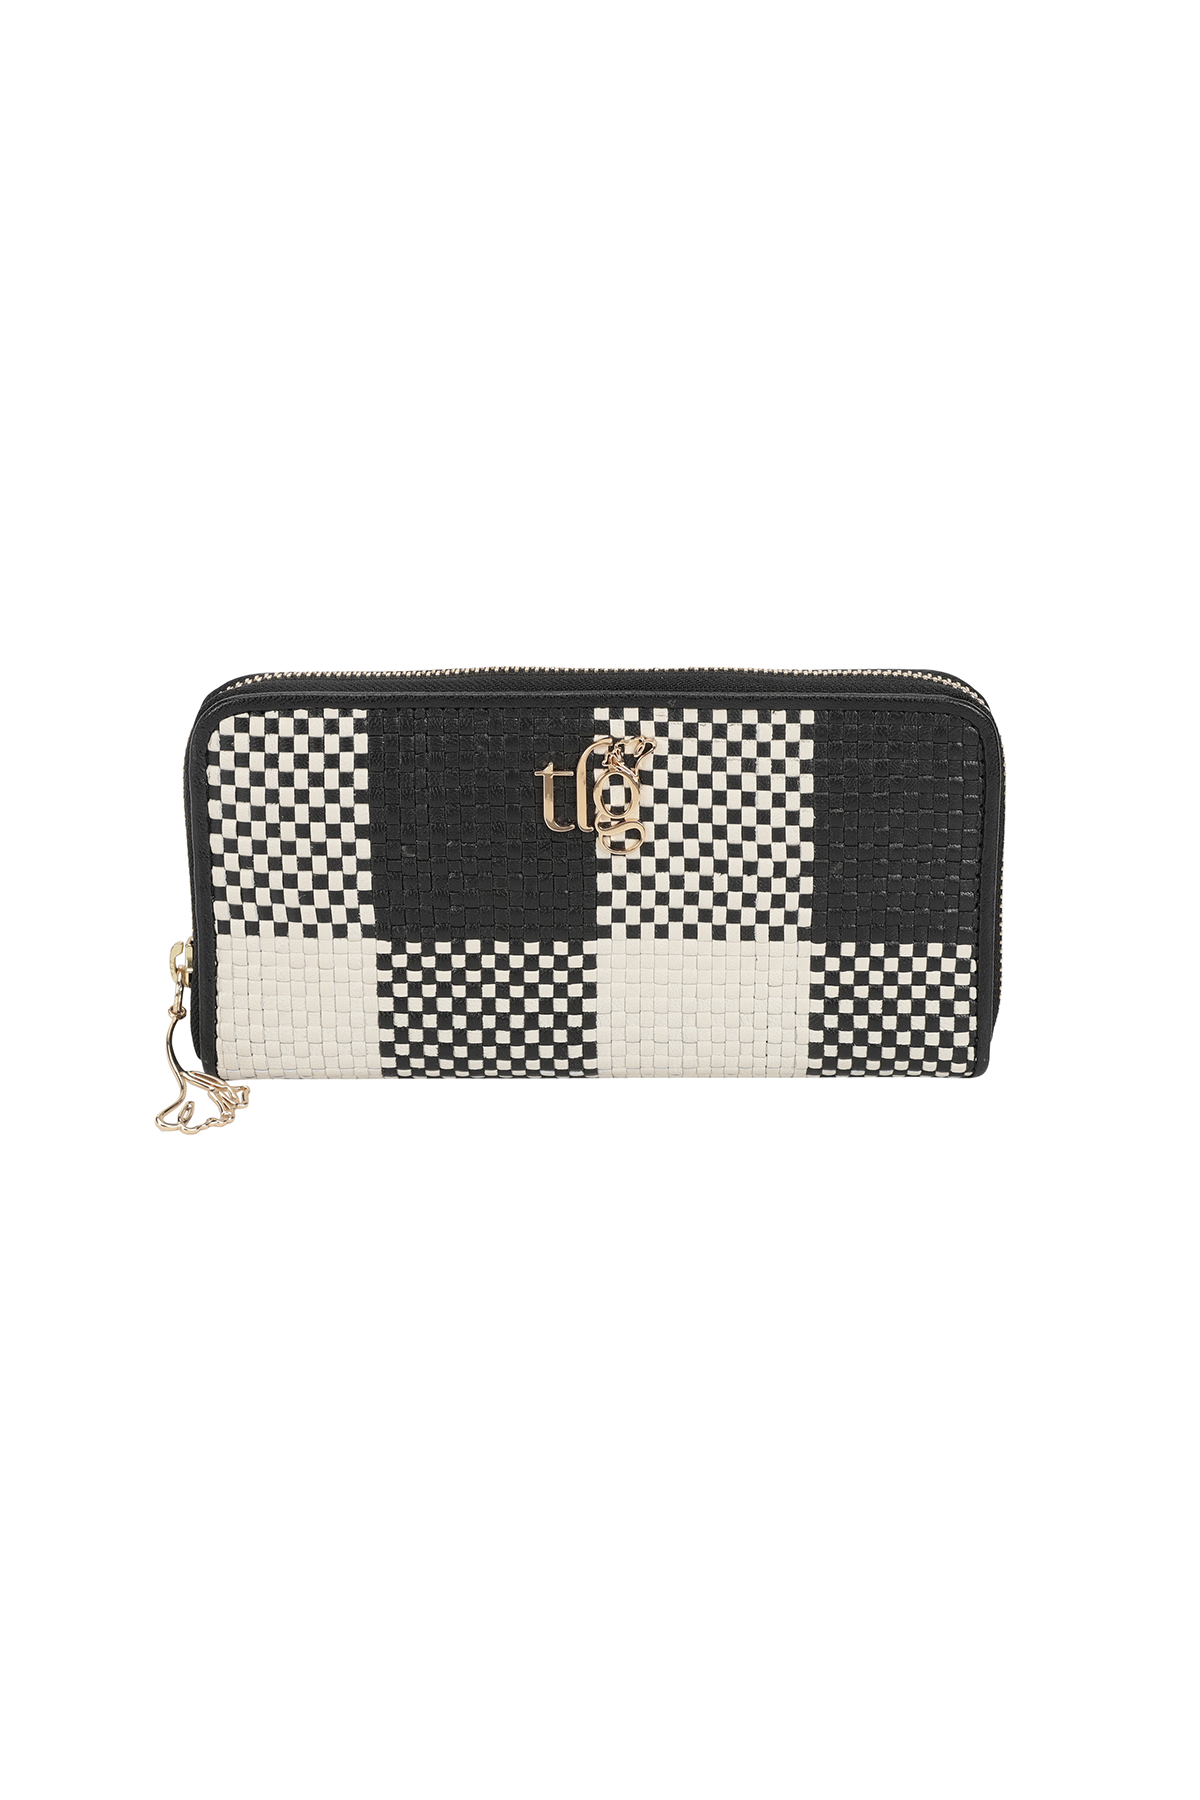 Rio Woven Leather Wallet